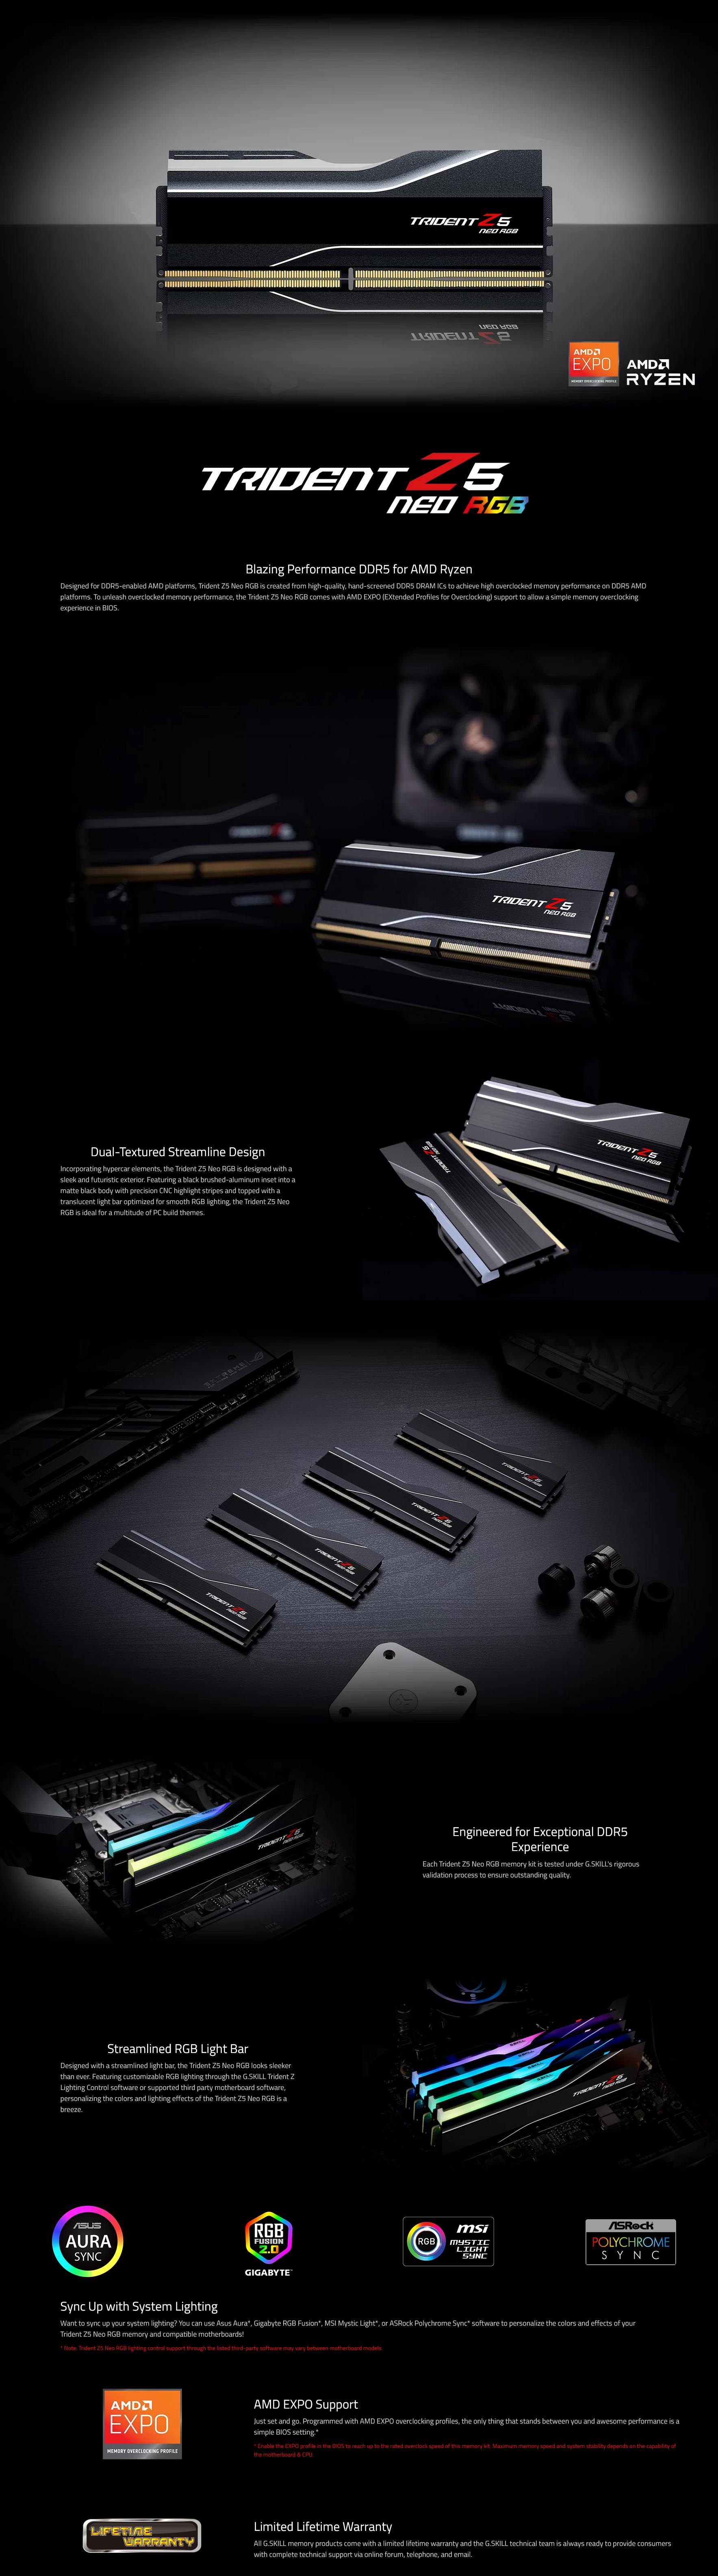 A large marketing image providing additional information about the product G.Skill 32GB Kit (2x16GB) DDR5 Trident Z5 Neo AMD EXPO RGB C36 6000MHz - Black - Additional alt info not provided